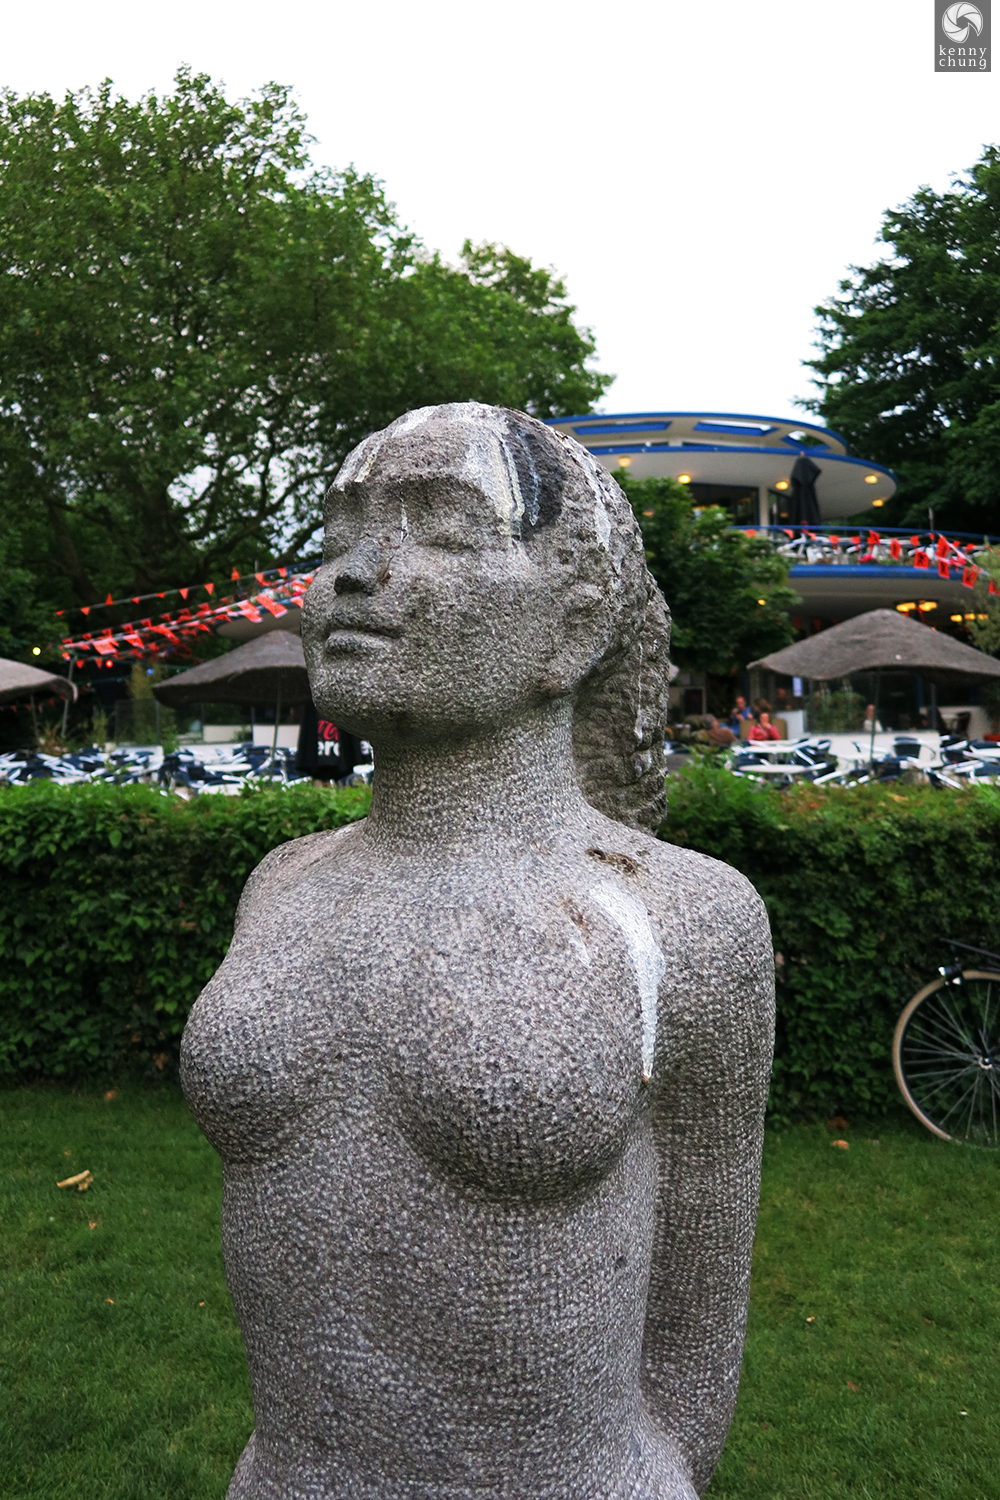 Statue of a woman with bird droppings on her at Vondelpark